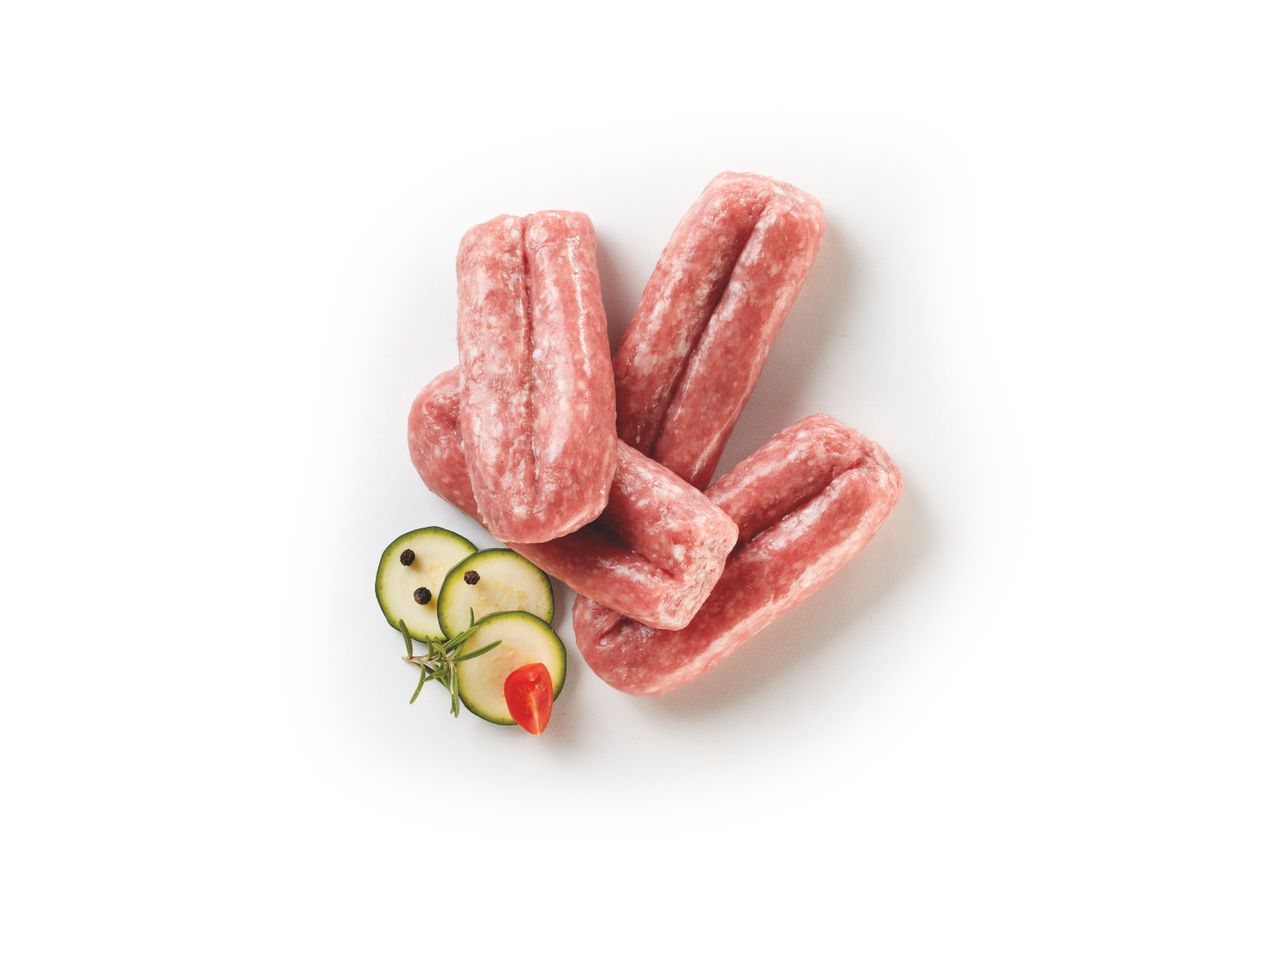 Go to full screen view: Sausages of Turkey, Chicken and Pork - Image 1